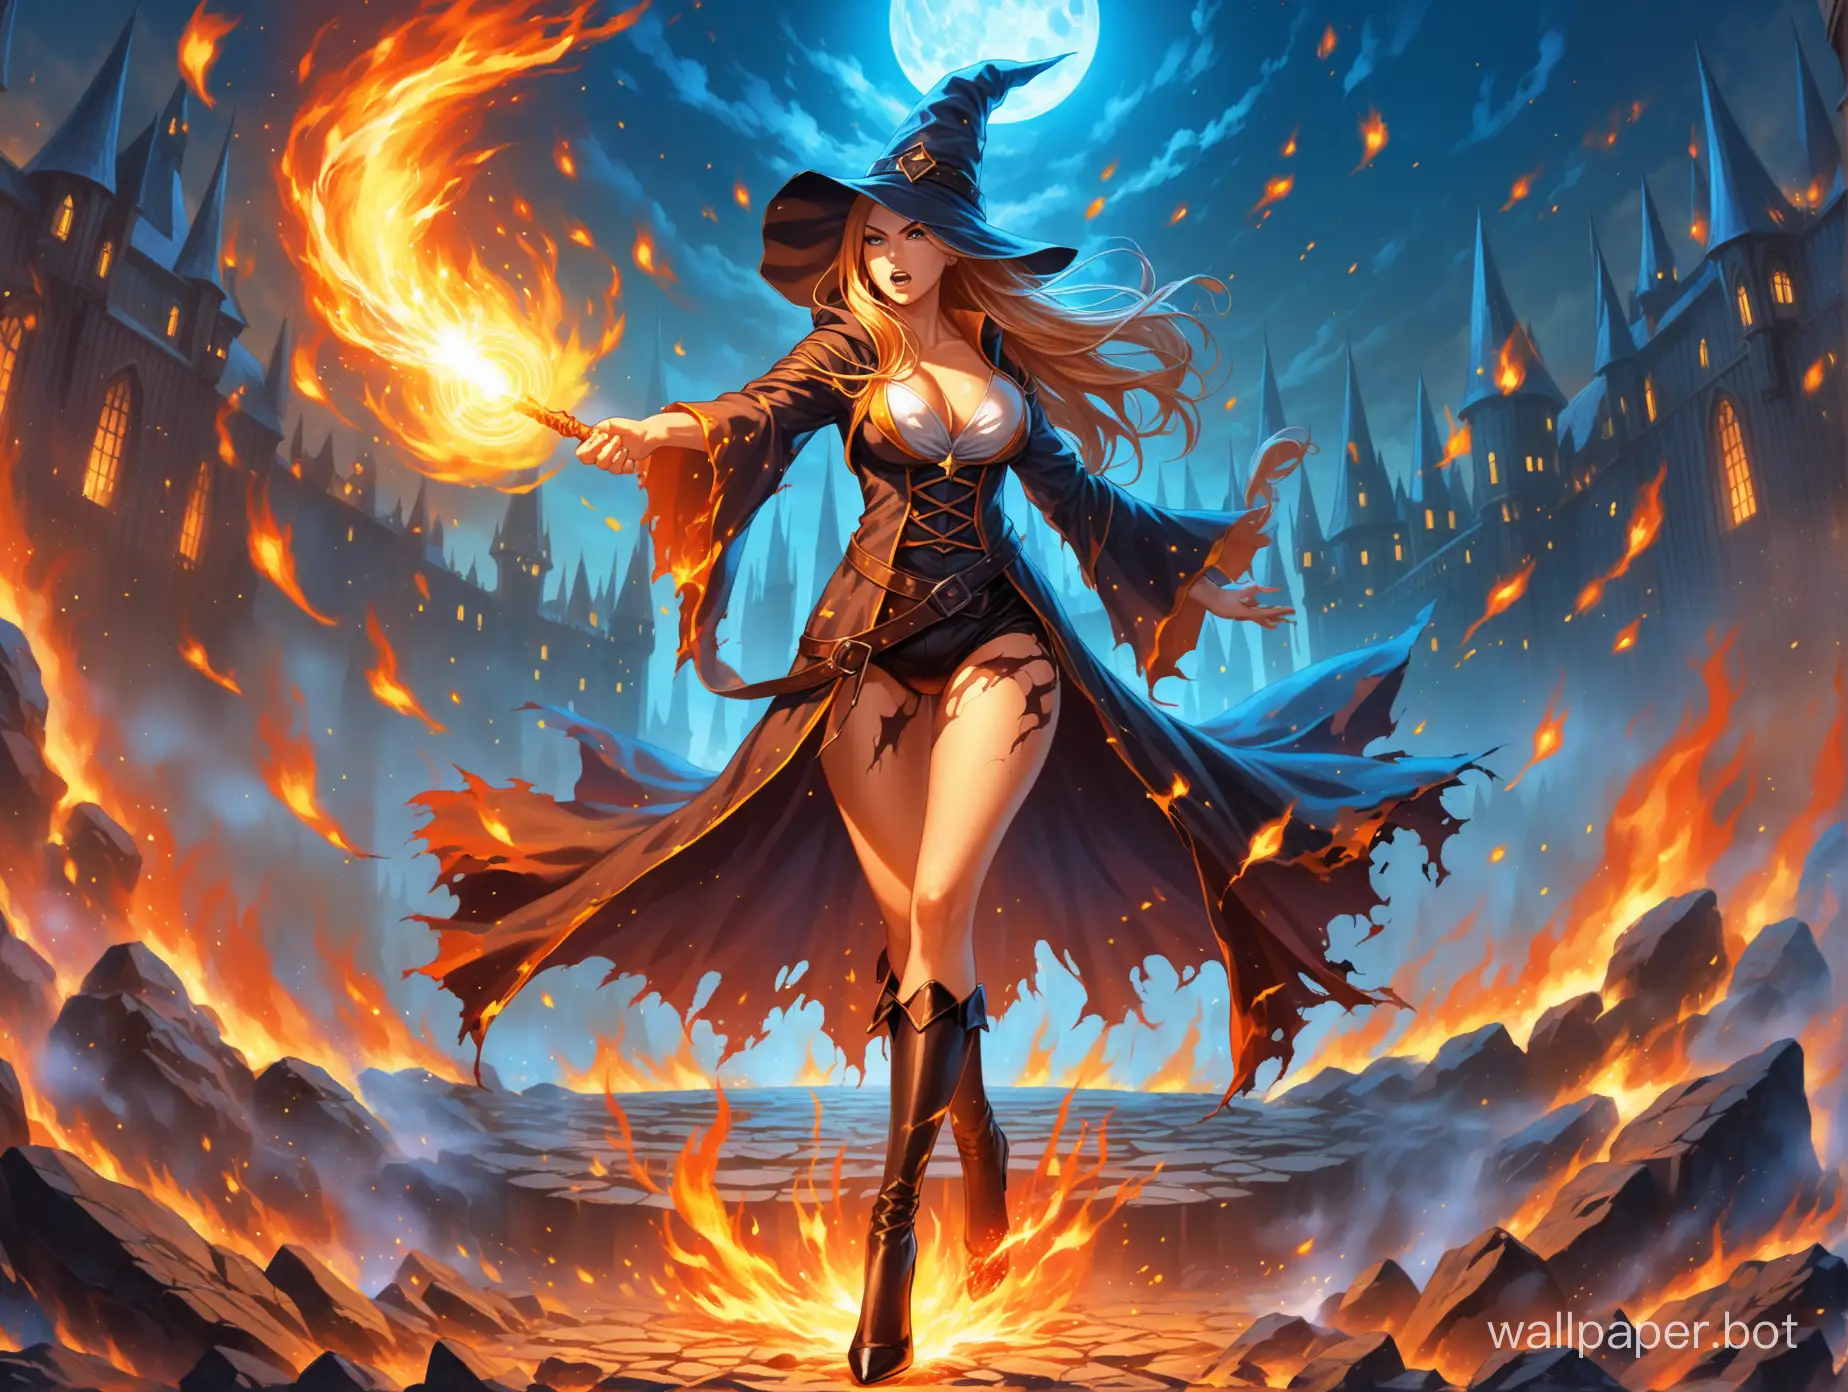 sexy female wizard wallpaper with torn clothes. black high heels. cast fire spell. fighting scene